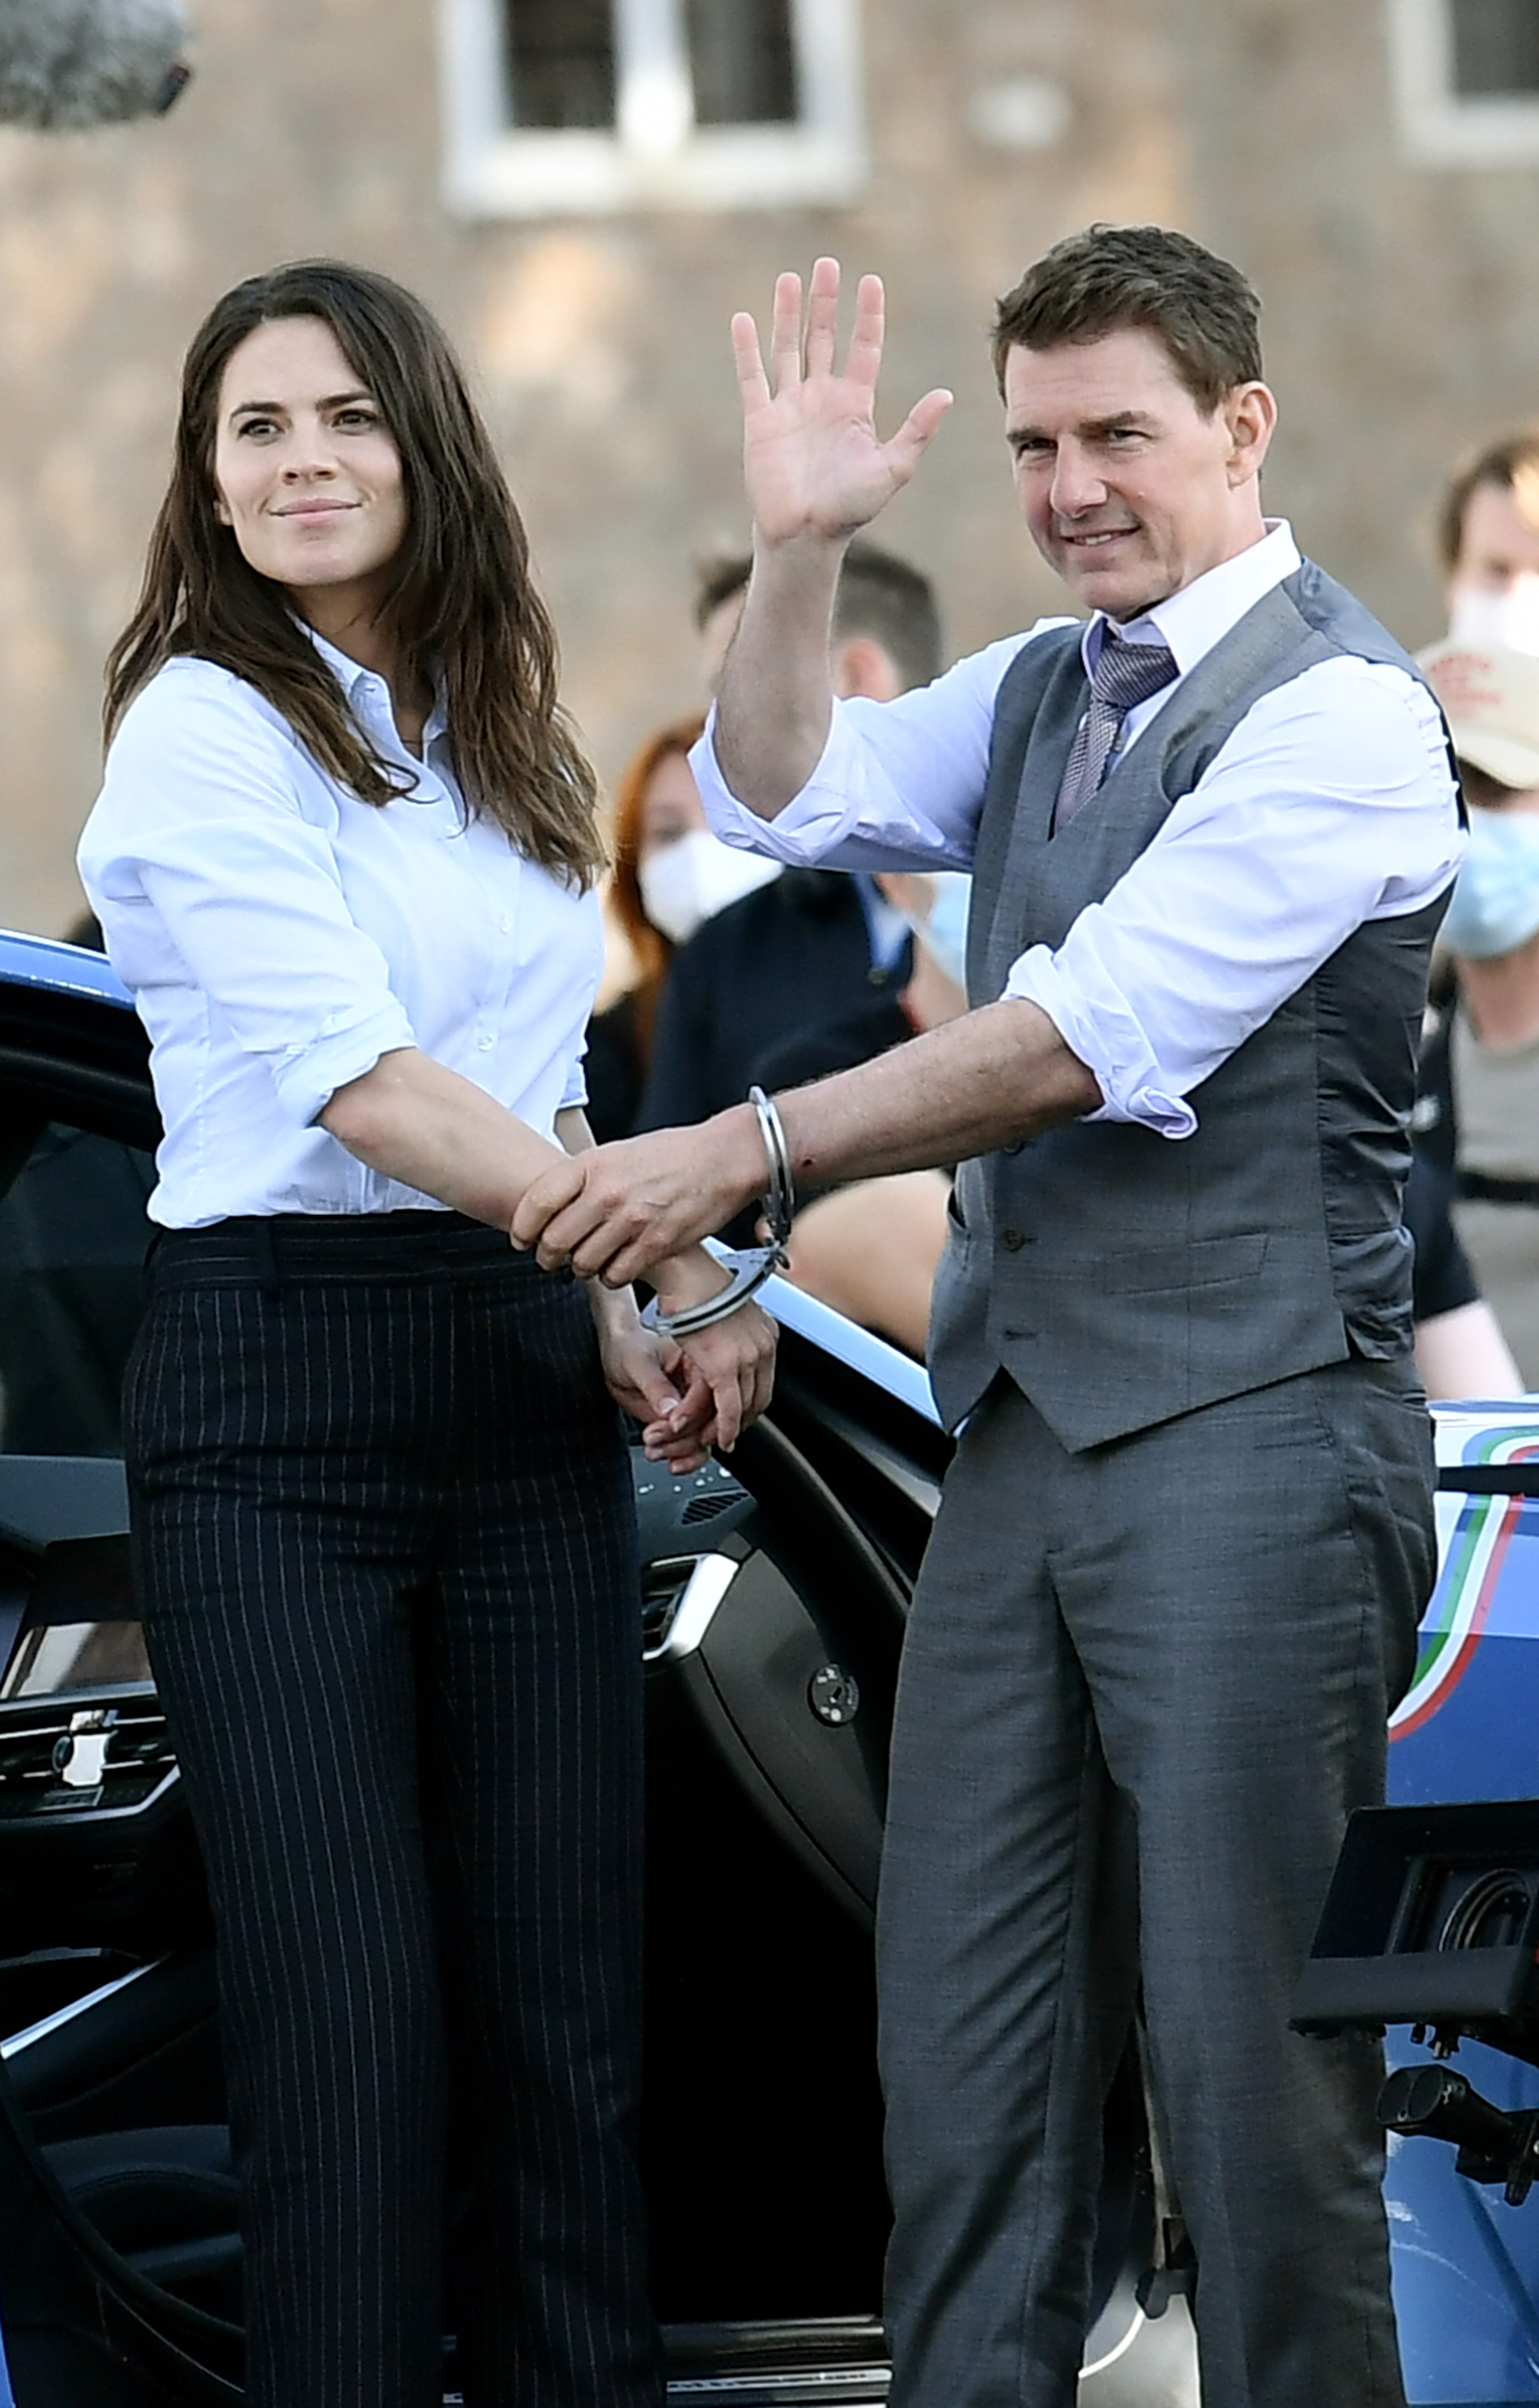 <p>In 2020, Tom Cruise was rumored to be getting closer with actress Hayley Atwell as they filmed "Mission: Impossible -- Death Reckoning Part One" amid the coronavirus pandemic, though neither has confirmed nor denied reports of romance. They're seen here filming in Rome that October. They were later seen together off-set at the <a href="https://www.wonderwall.com/celebrity/photos/wimbledon-tennis-championships-2021-all-the-celebs-and-royals-who-attended-474221.gallery">Wimbledon tennis championships</a> in London in July 2021.</p>